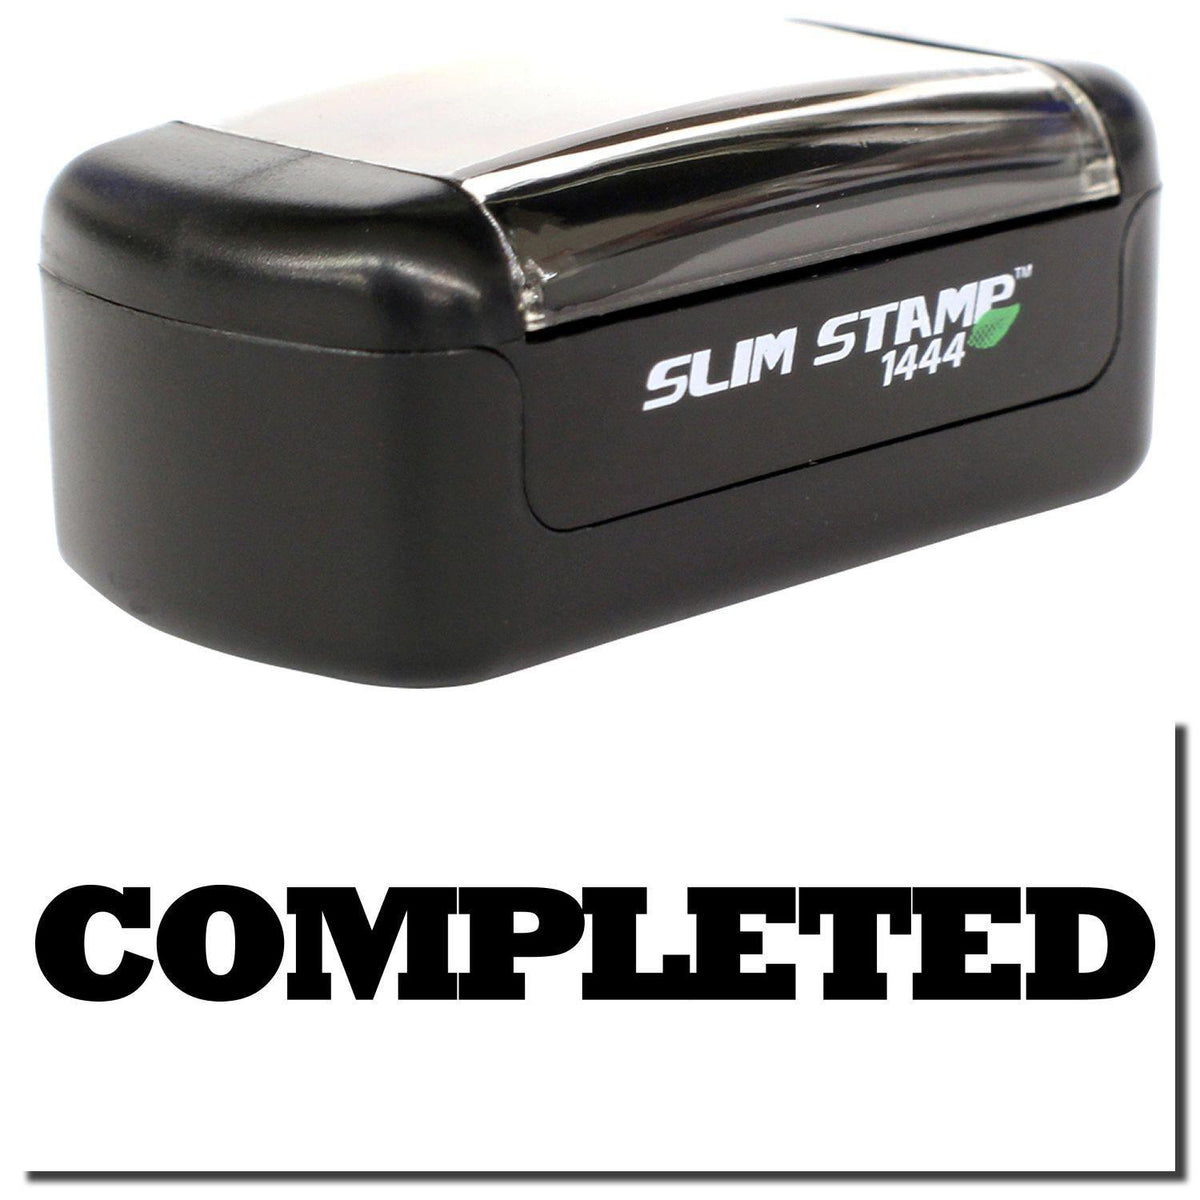 A stock office pre-inked stamp with a stamped image showing how the text &quot;COMPLETED&quot; in bold font is displayed after stamping.